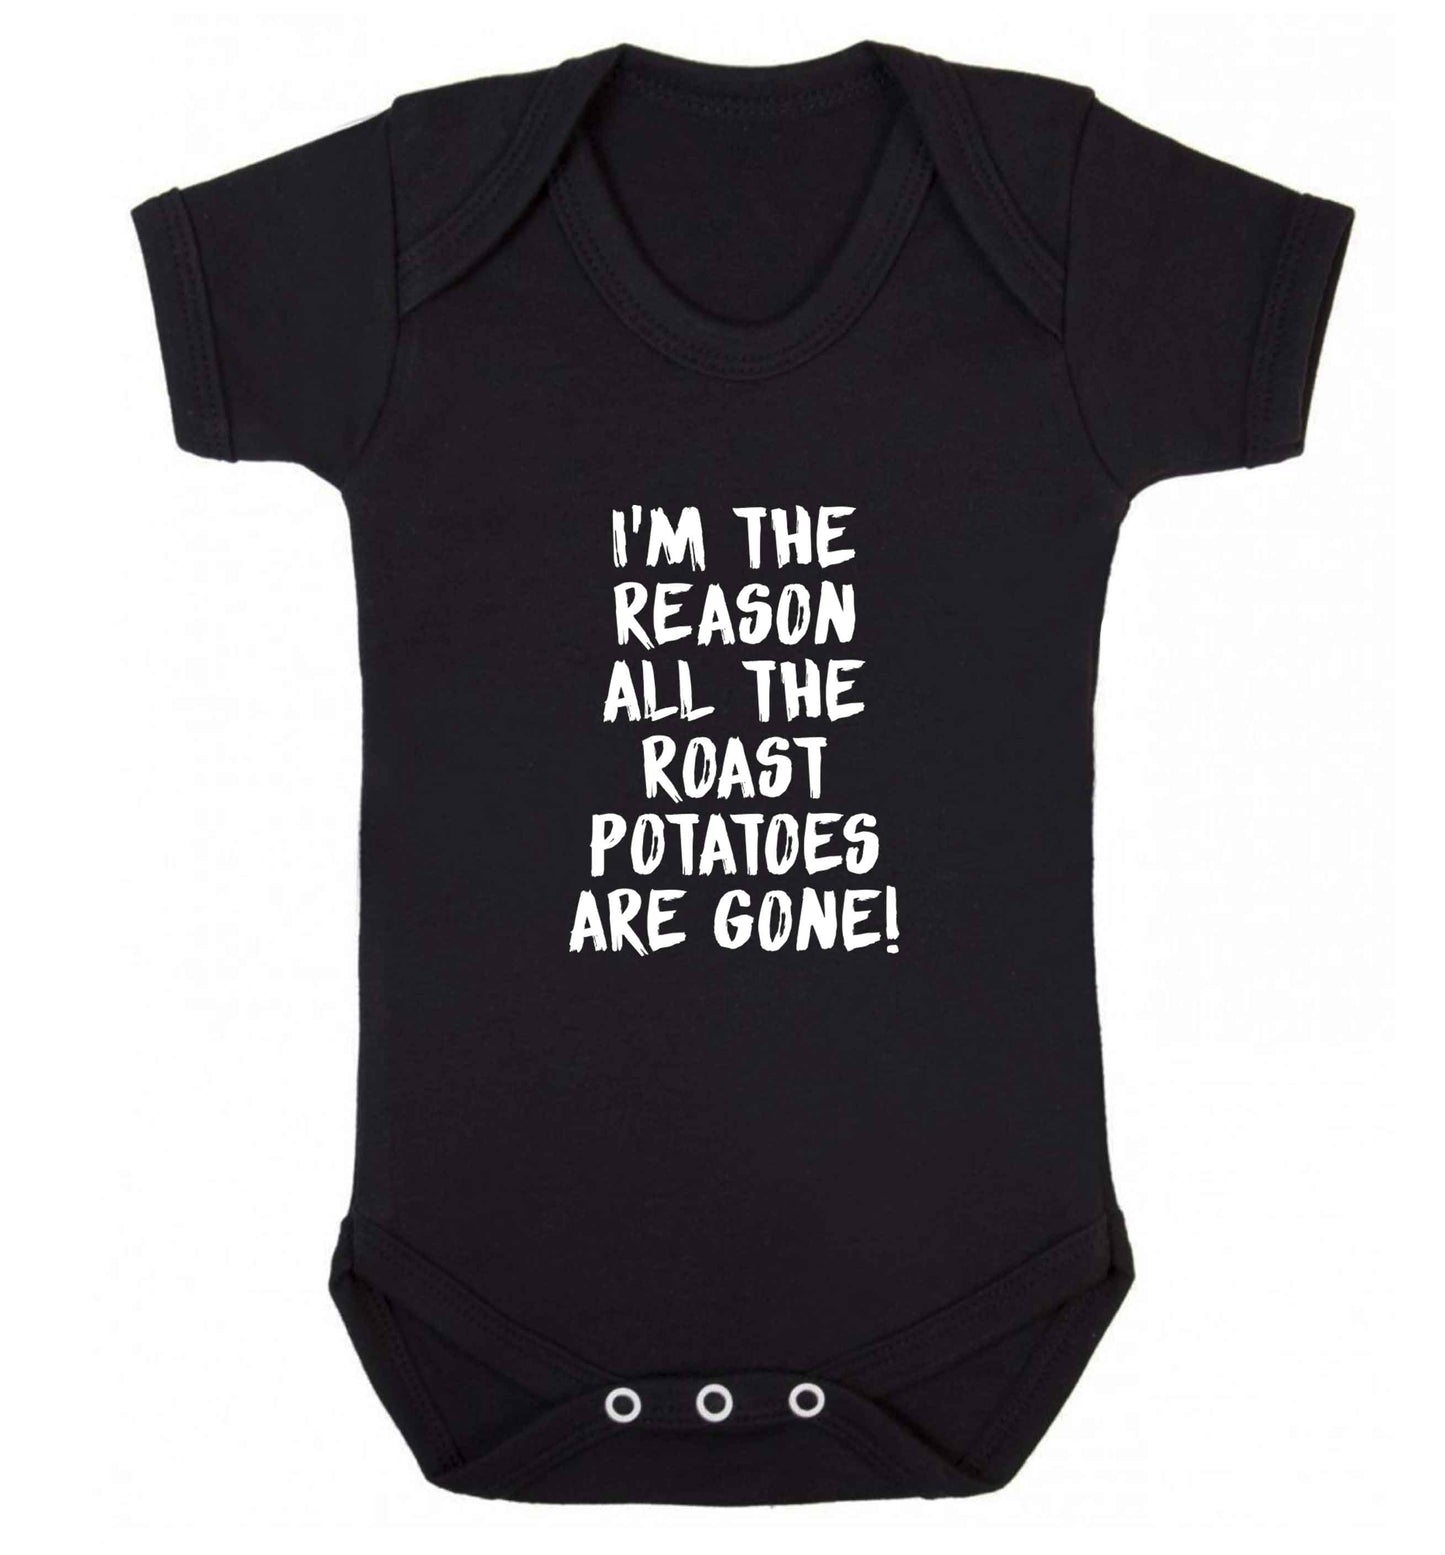 I'm the reason all the roast potatoes are gone baby vest black 18-24 months